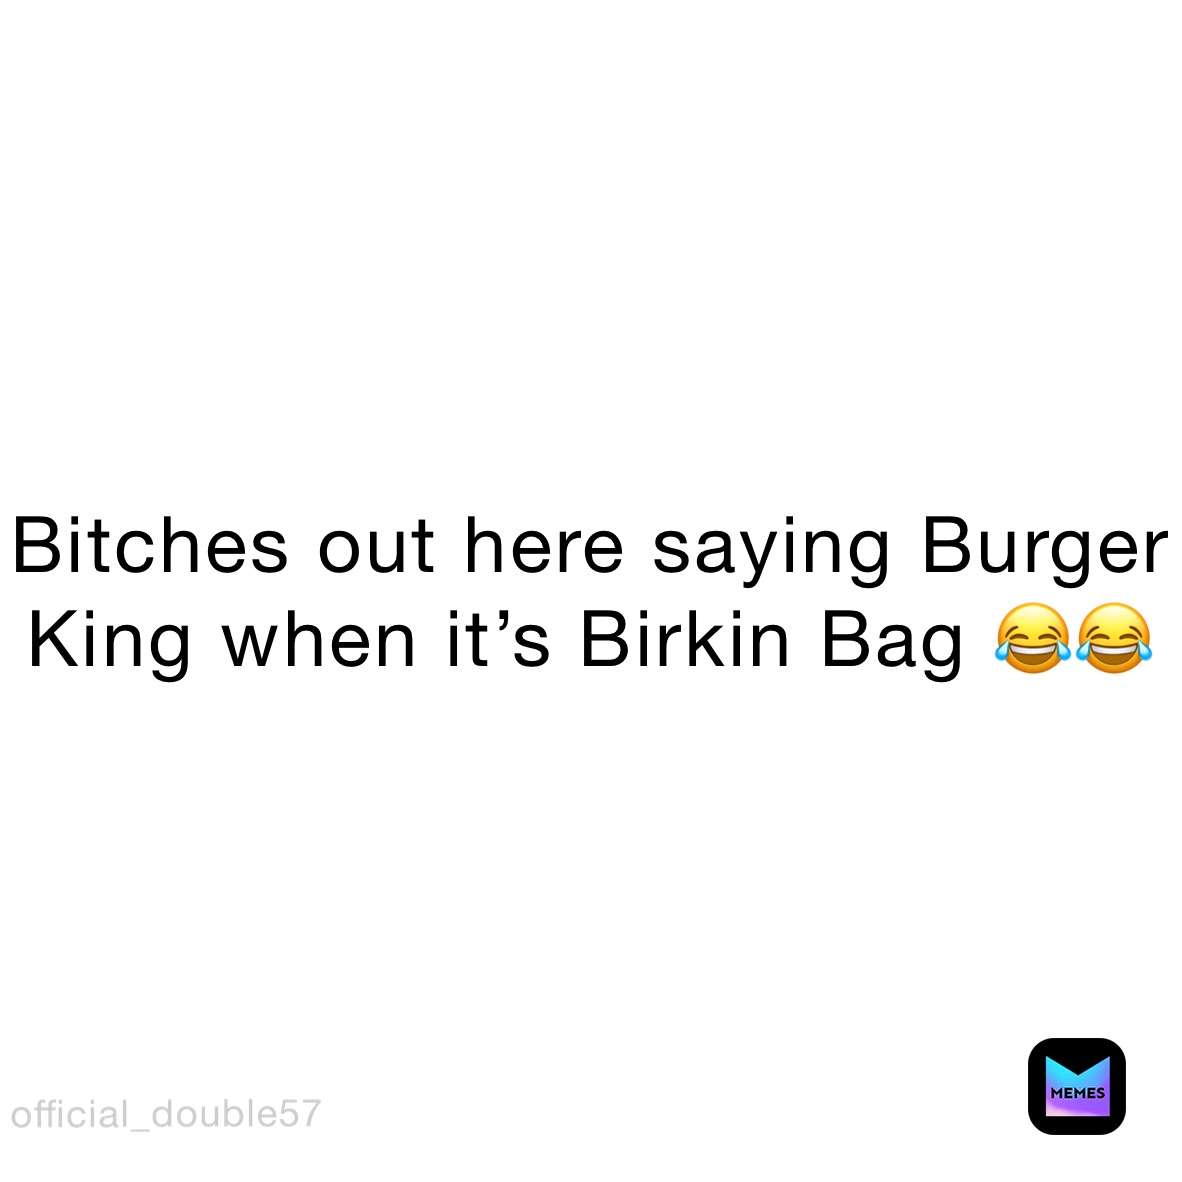 Bitches out here saying Burger King when it's Birkin Bag 😂😂, @double_ugly57